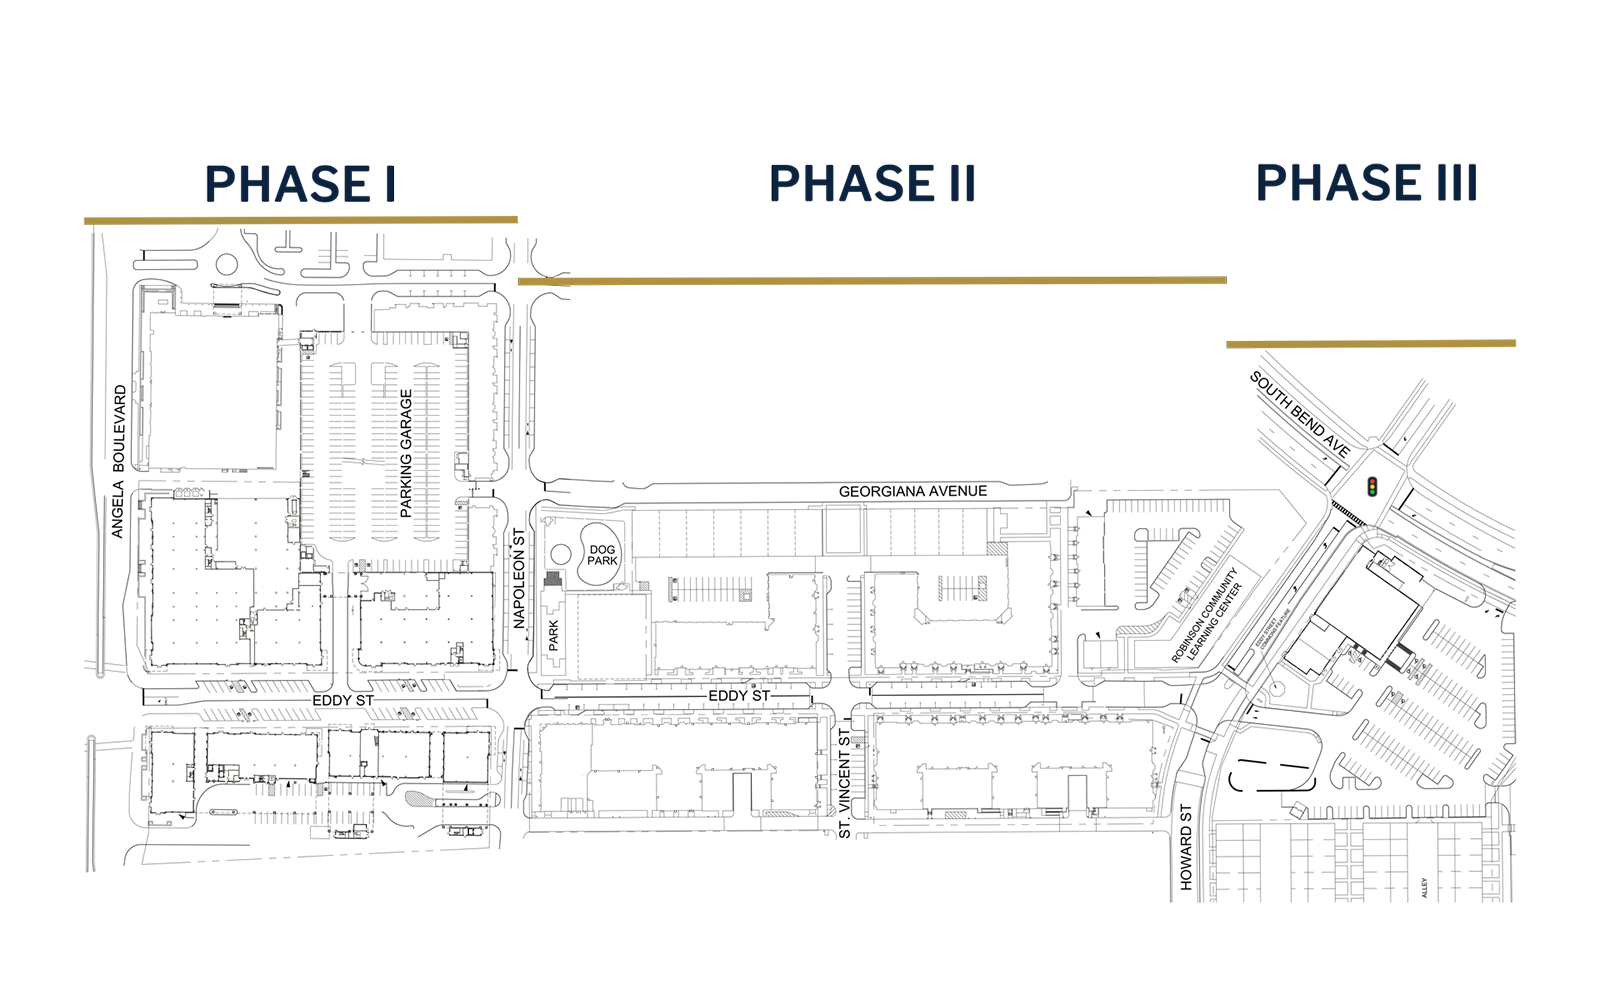 A rendering of the entire project plan with Phases I, II, and III indicated by horizontal gold lines above the rendering.